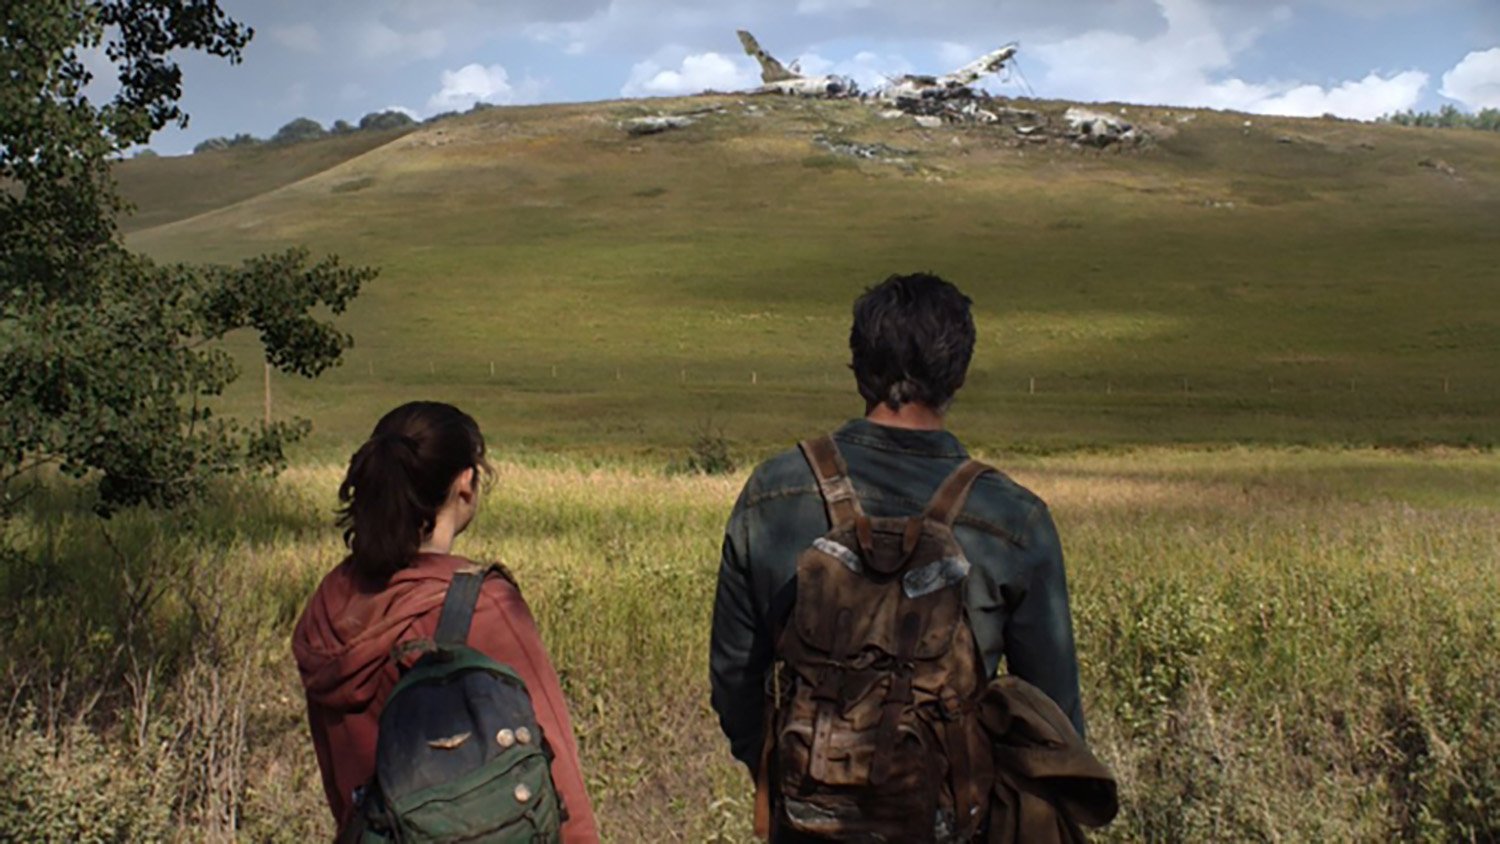 HBOs The Last of Us cast members Bella Ramsey as Ellie and Pedro Pascal as Joel stare at a grass field